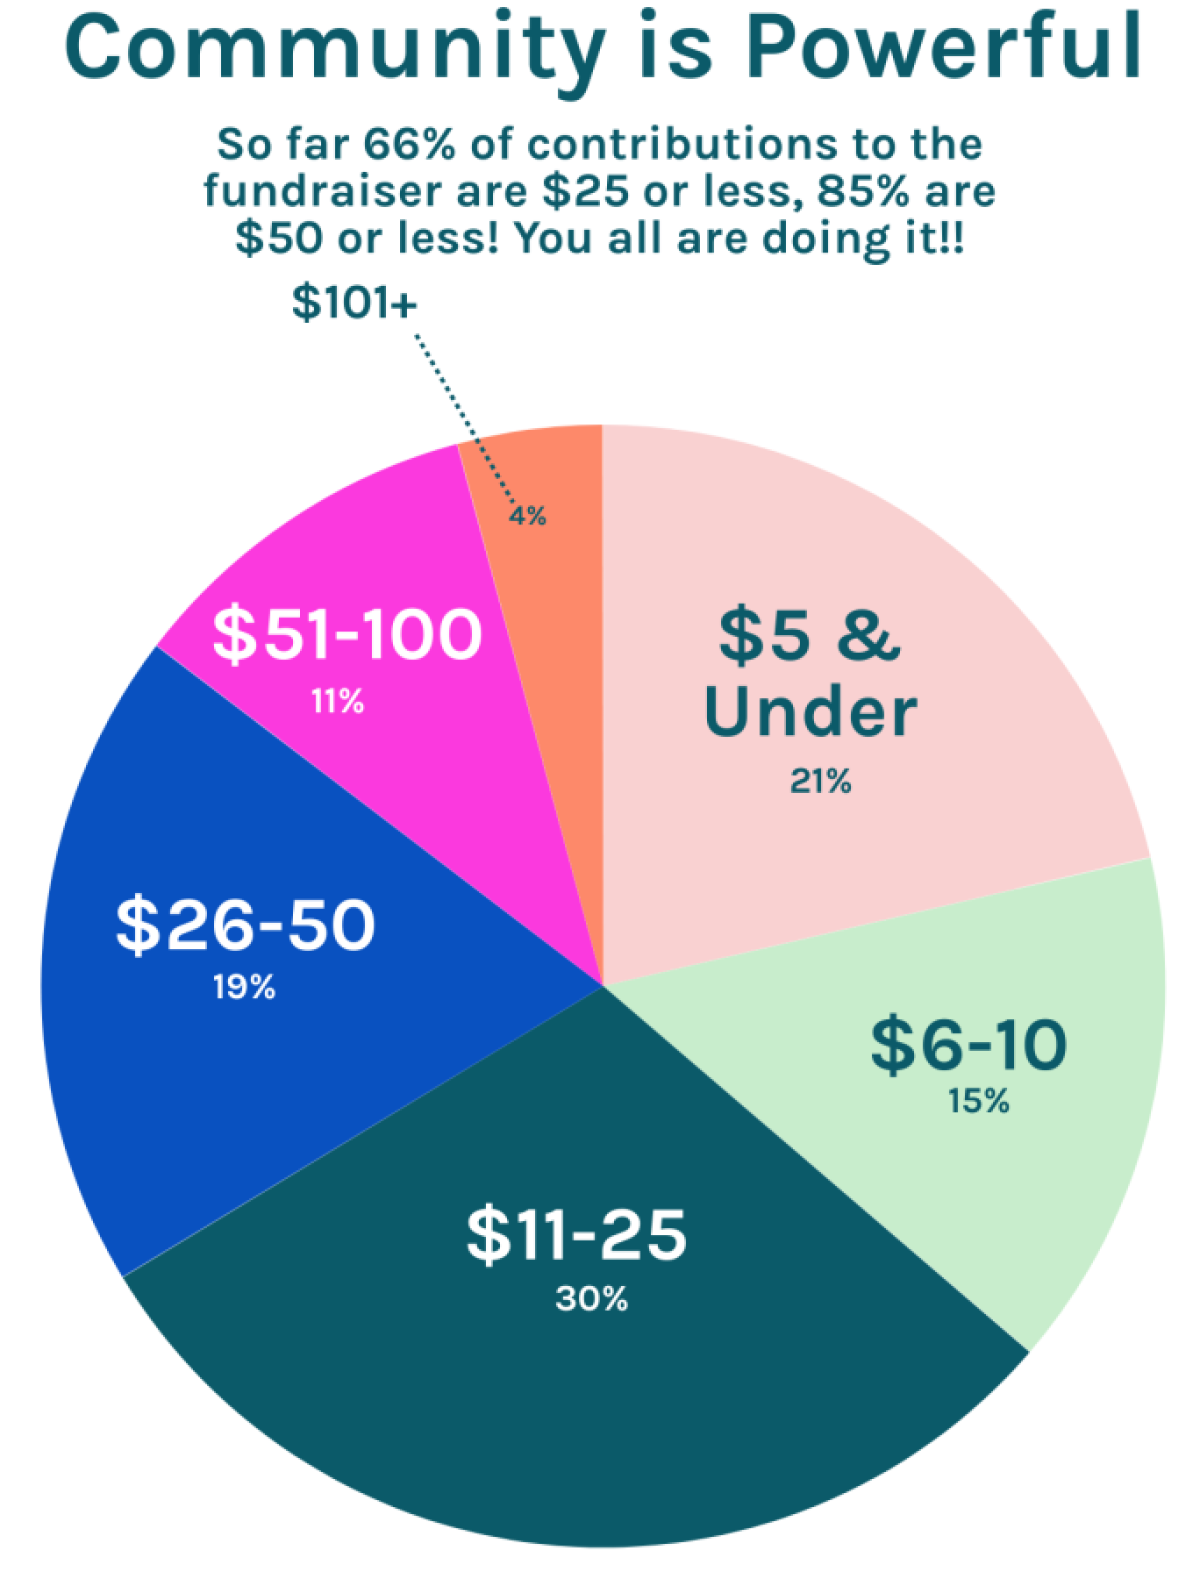 This chart depicts the percentage of gifts by amount so far this fundraiser. 25% were $5 or under, 15% were $6 to $10, 30% were $11 to $25, 19% were $26 to $50, 11% were $51 to $100 and just 4% were $101 or more. Community is Powerful. So far 66% of contributions to the fundraiser are $25 or less, 85% are $50 or less! You are all doing it!!